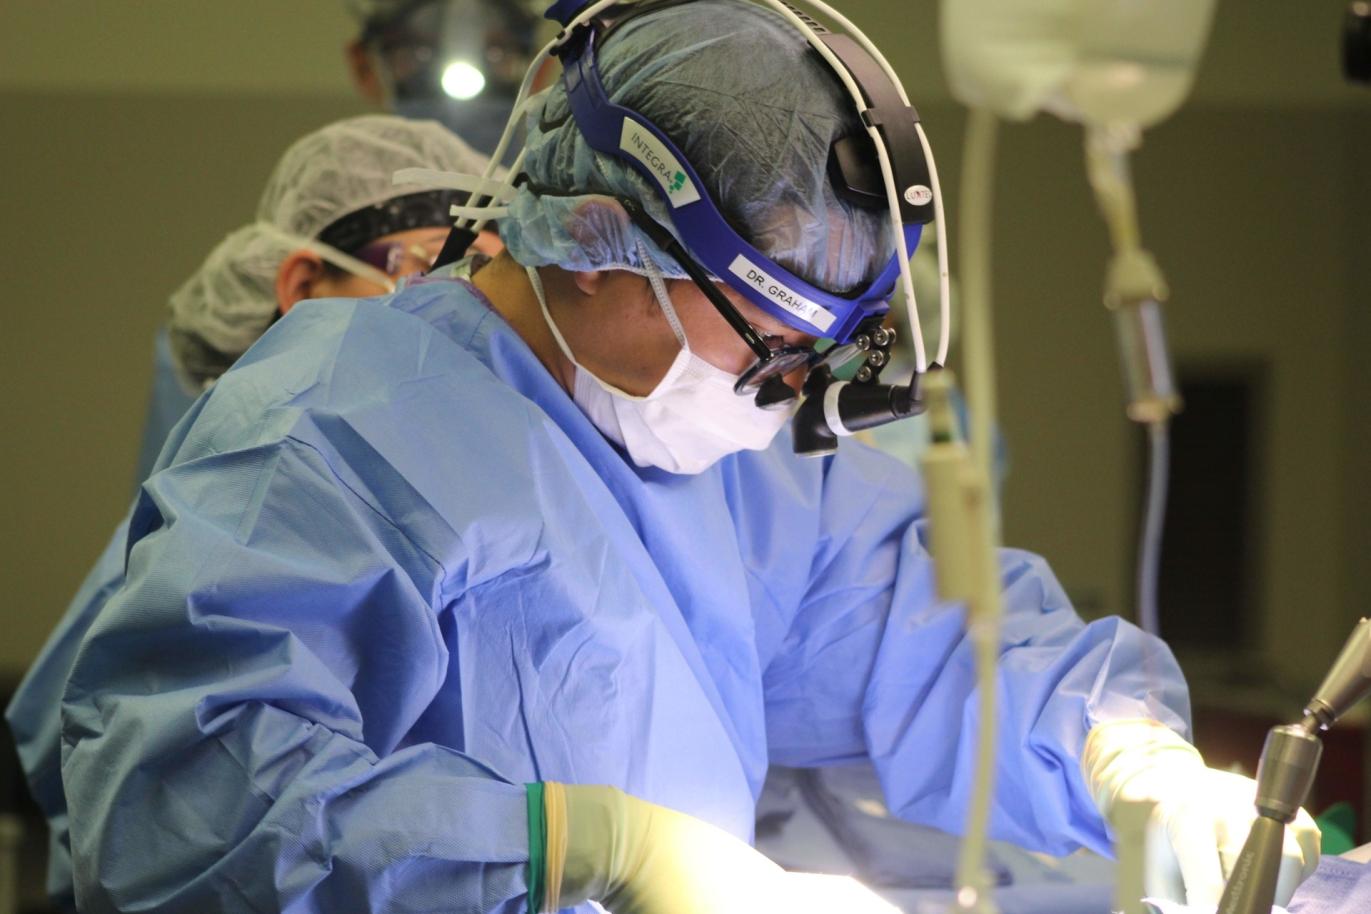 How Do Surgeons Access the Brain During Surgery?